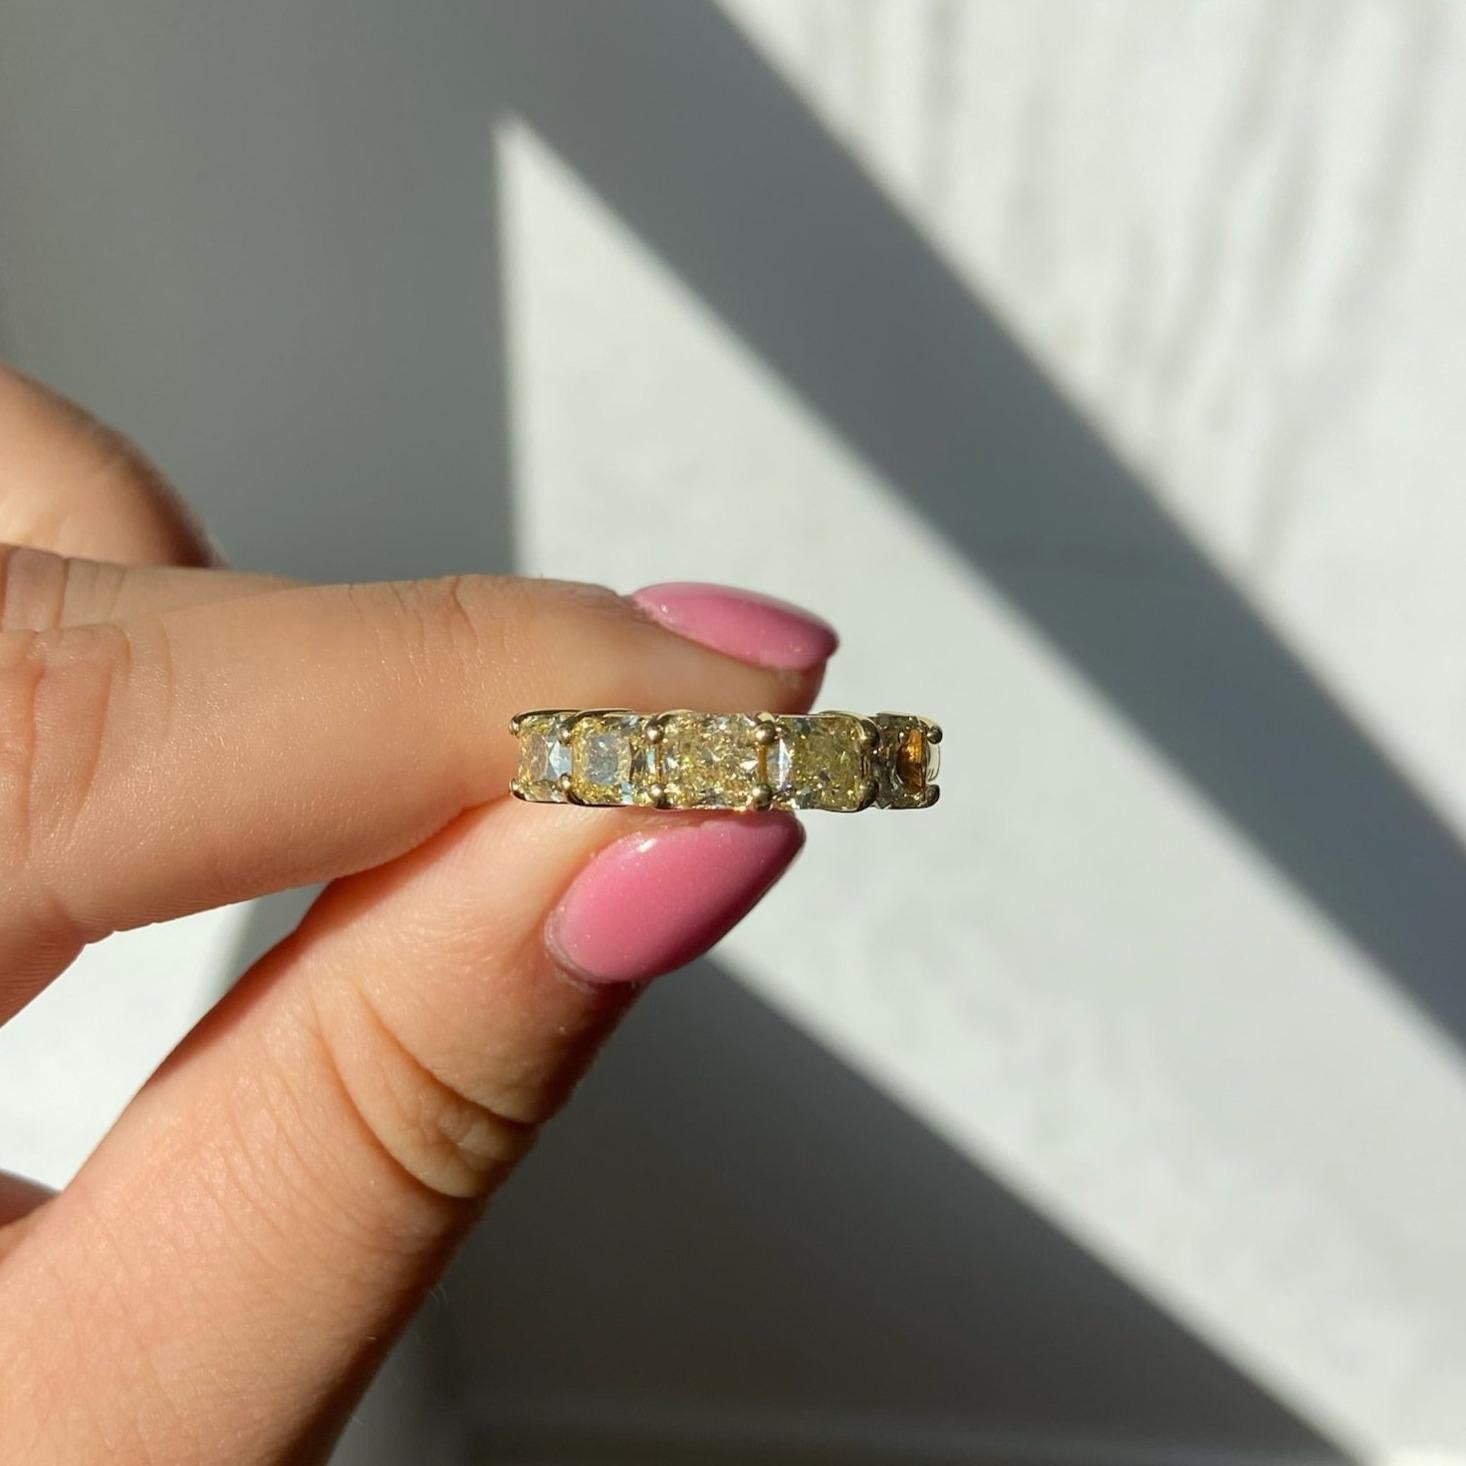 Signature half eternity band style, giving you the look of a full eternity band while using half the amount of diamonds. 
3.45 Carat Total Weight
5 Radiant cut diamonds
Fancy Yellow Color
VS-VVS Clarity Diamond
Set in 18k Yellow Gold
Handmade in